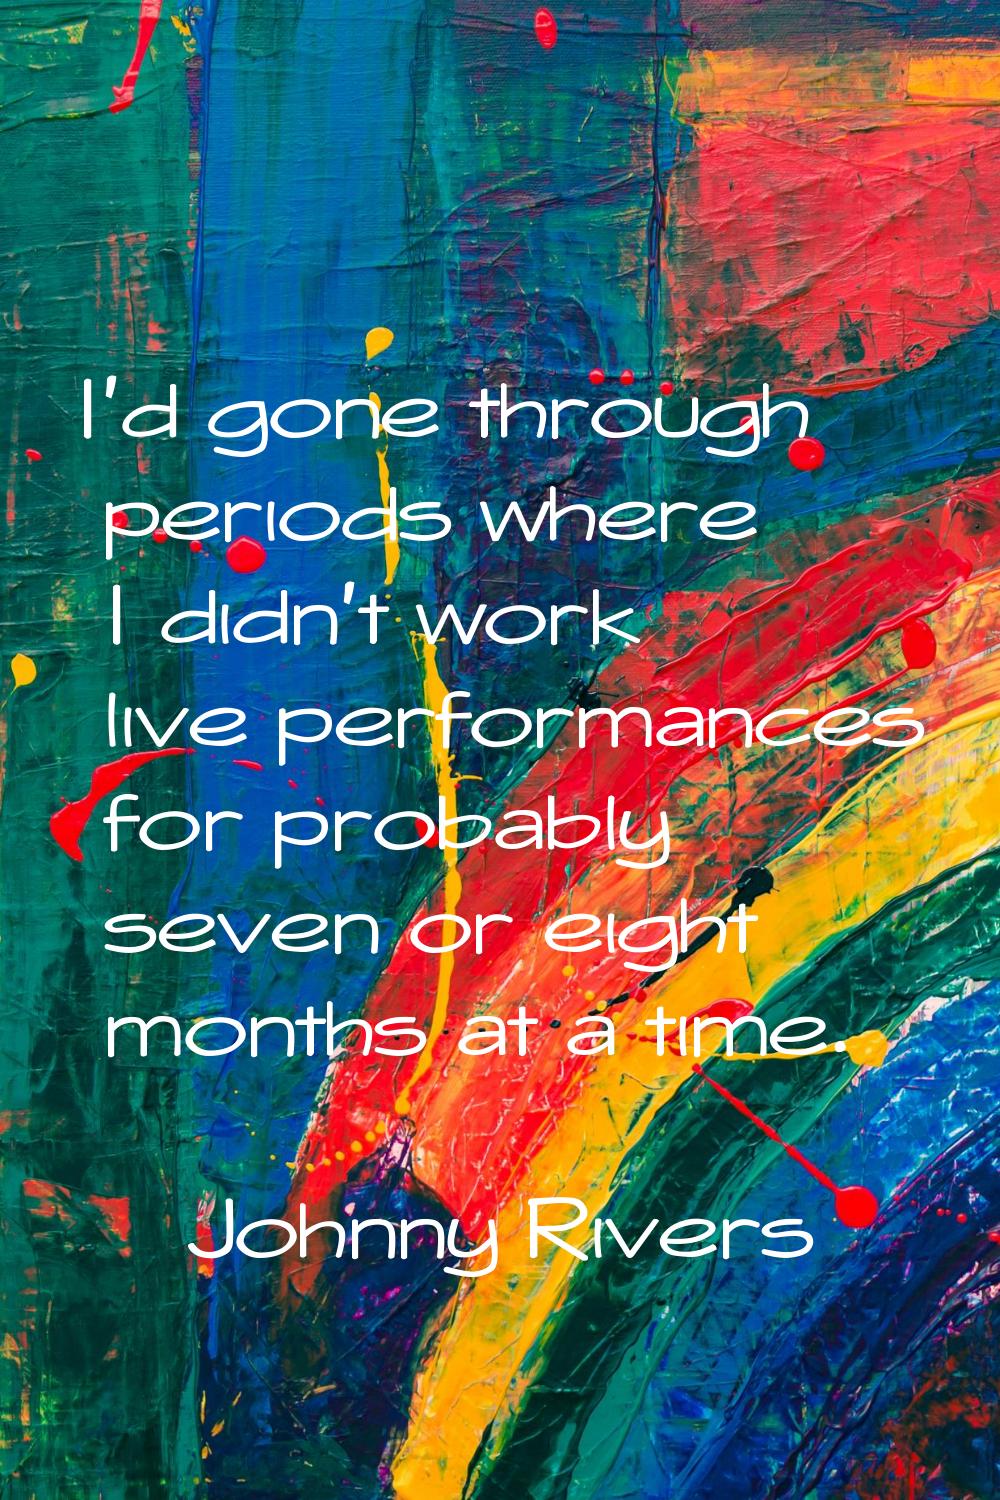 I'd gone through periods where I didn't work live performances for probably seven or eight months a